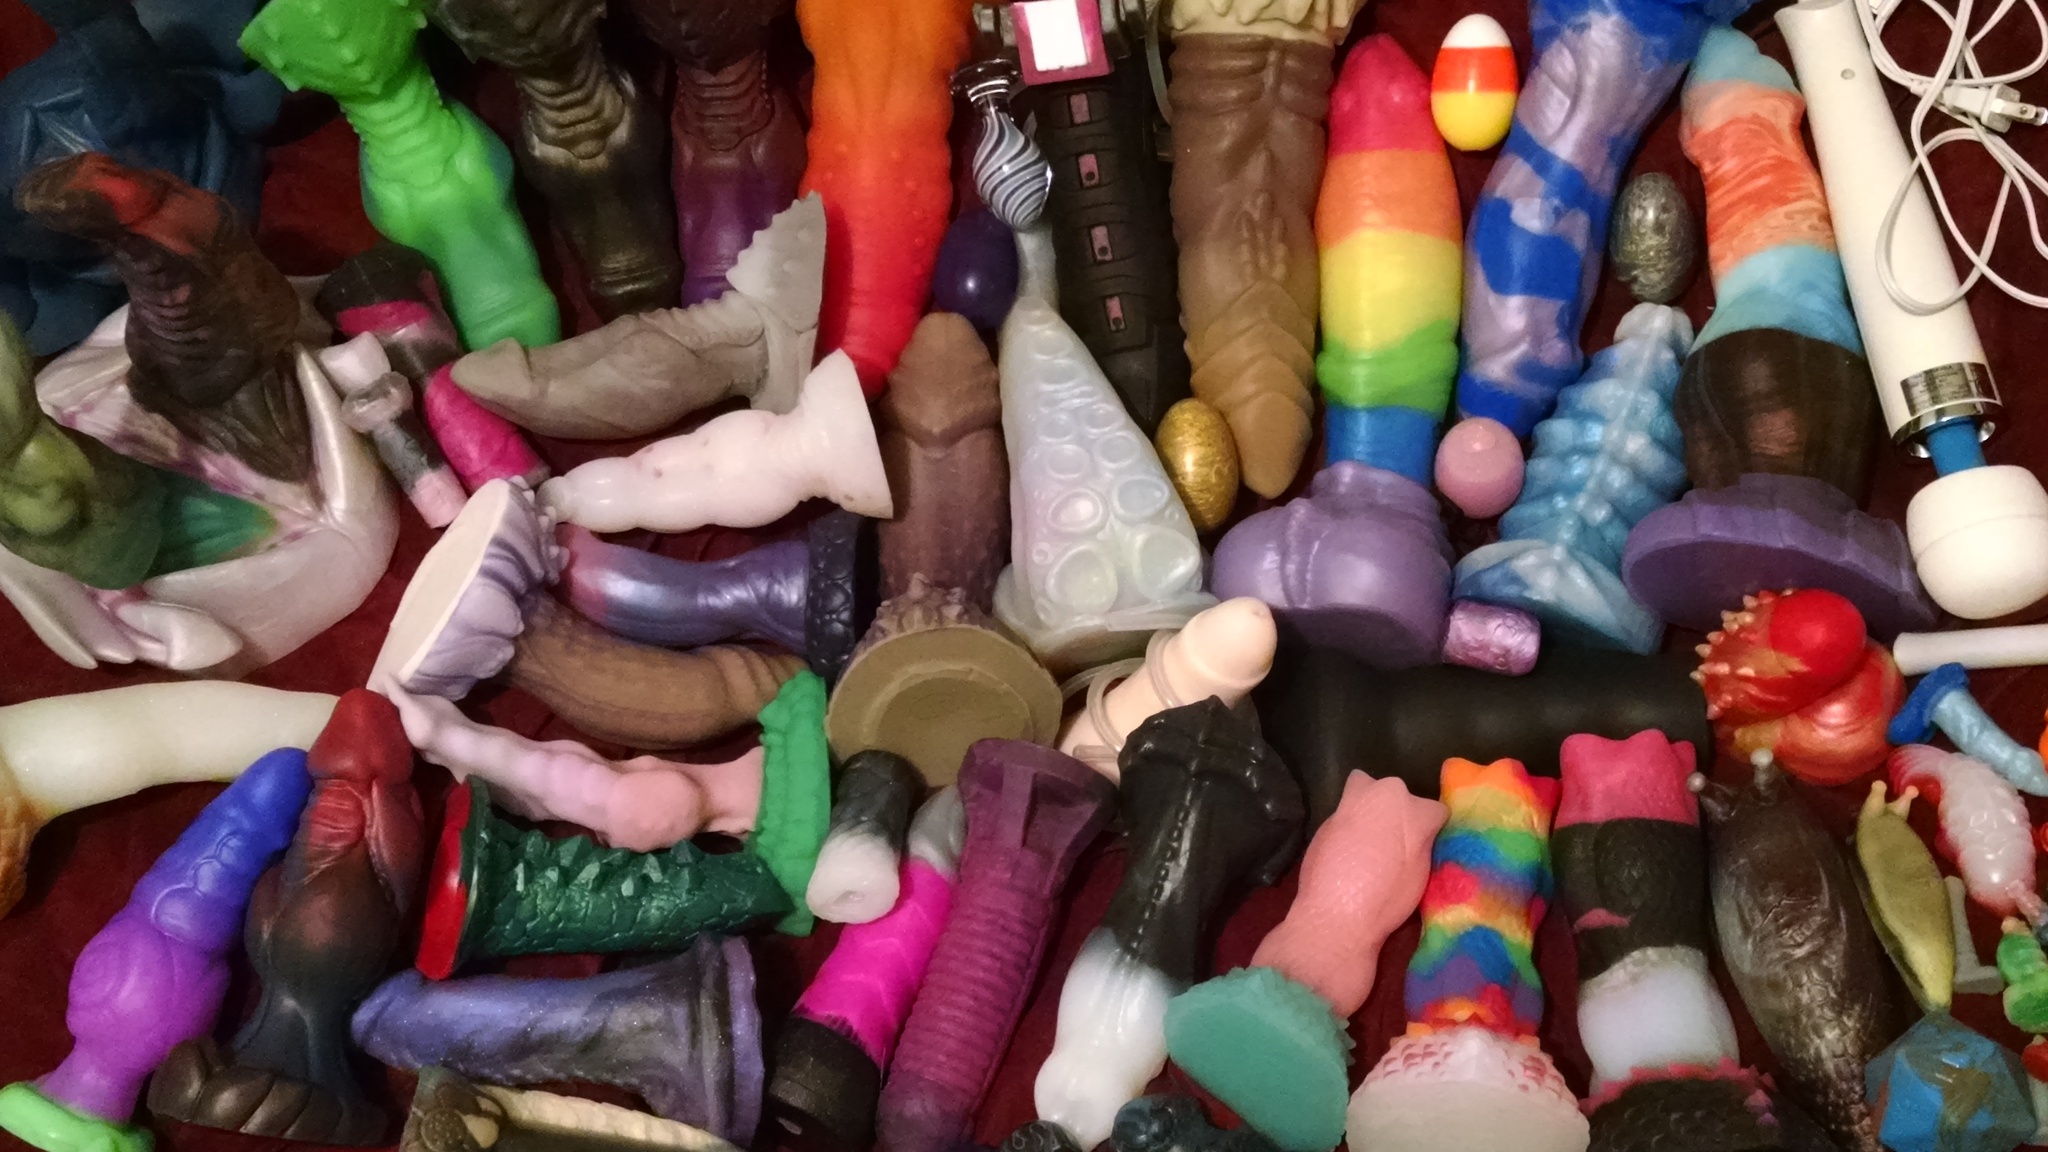 alison mather recommends extreme sex toys tumblr pic